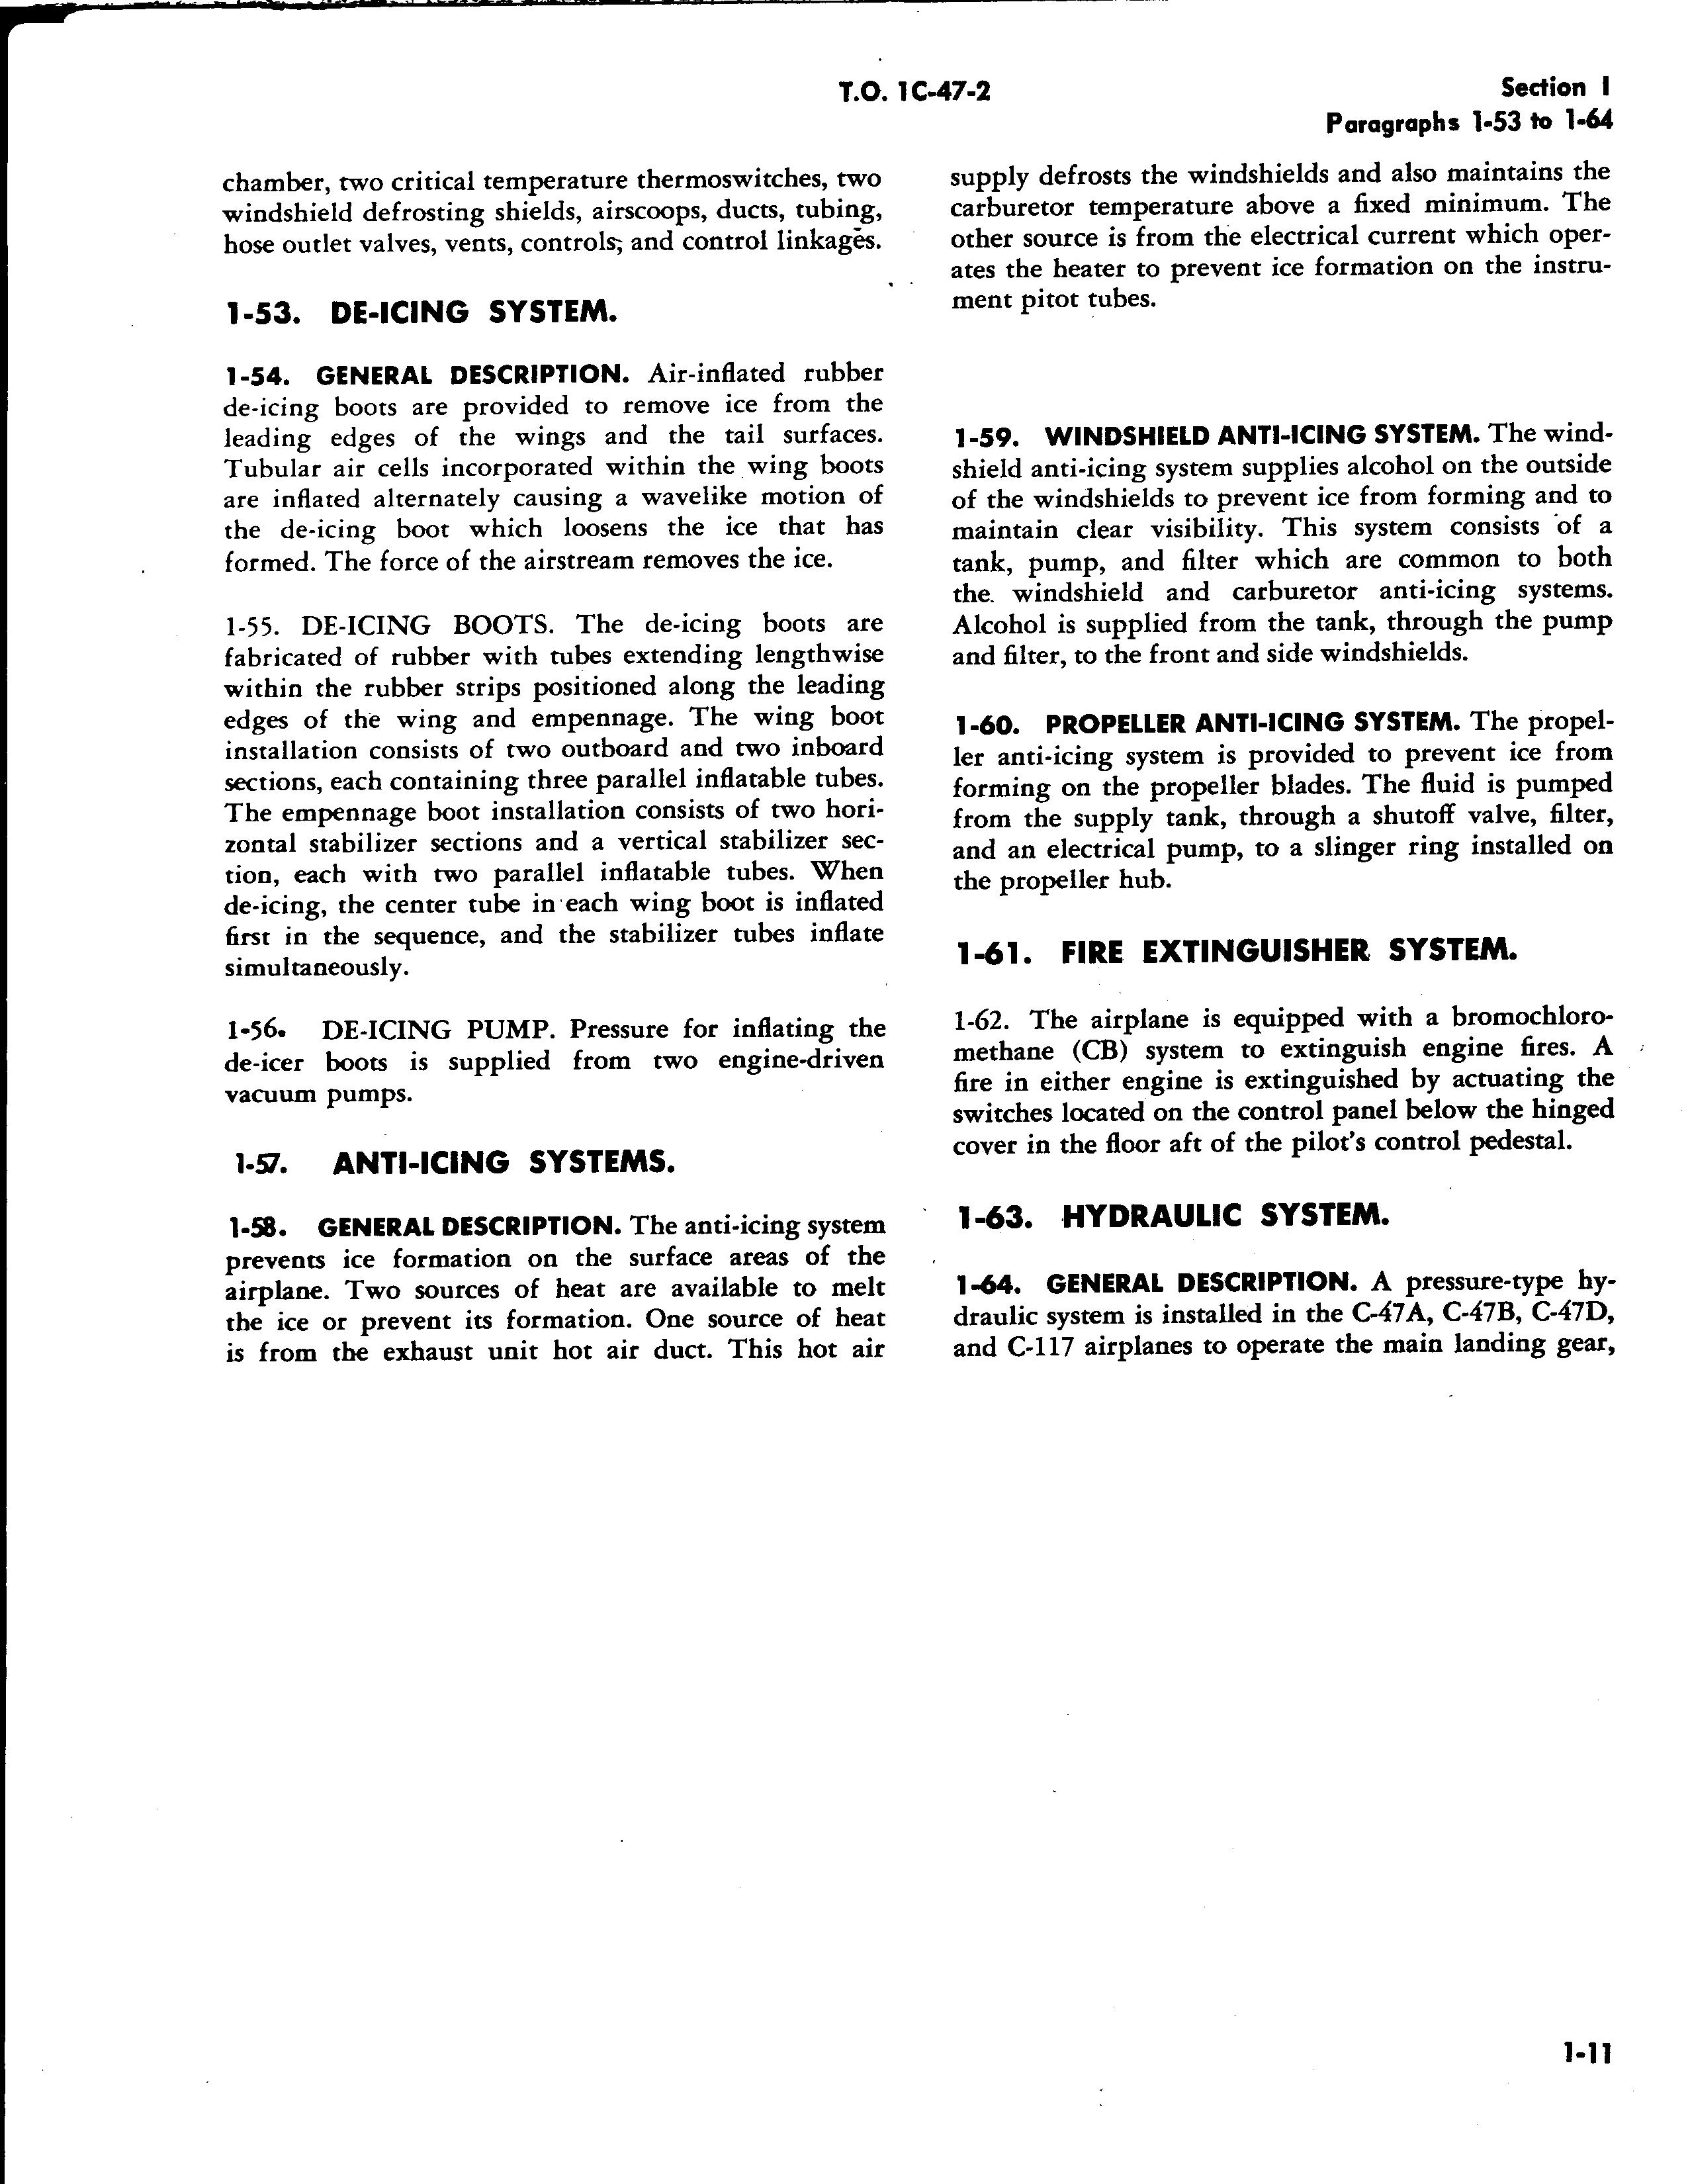 Sample page 55 from AirCorps Library document: Maintenance Instructions for C-47, A, B, D, C-117A and C-117B Aircraft